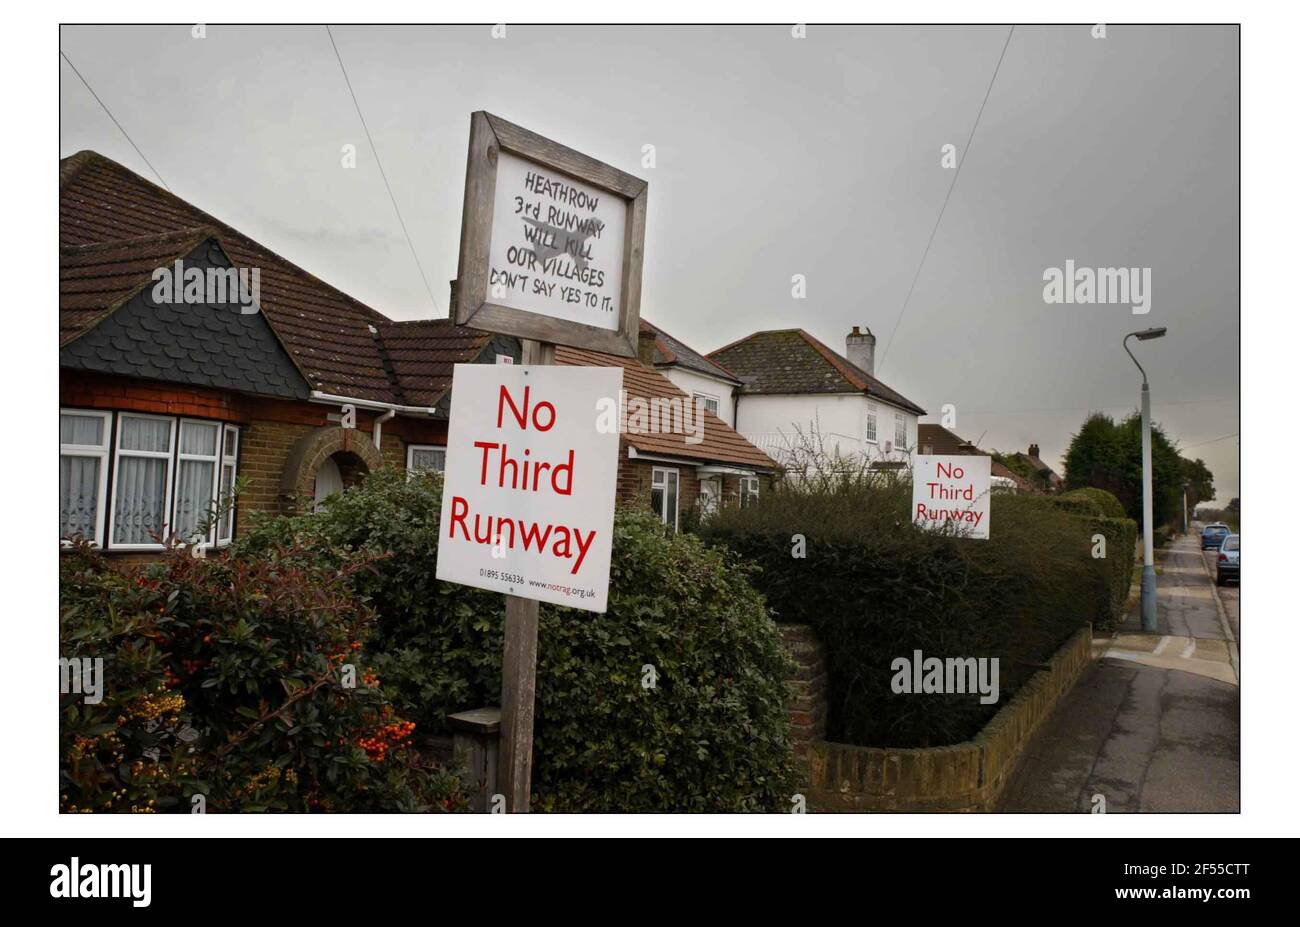 Third runway at Heathrow......The village of Sipson between the A4 and M4 roads on the border of Heathrow which is in the path of the proposed new runway.pic David Sandison 22/10/2003 Stock Photo